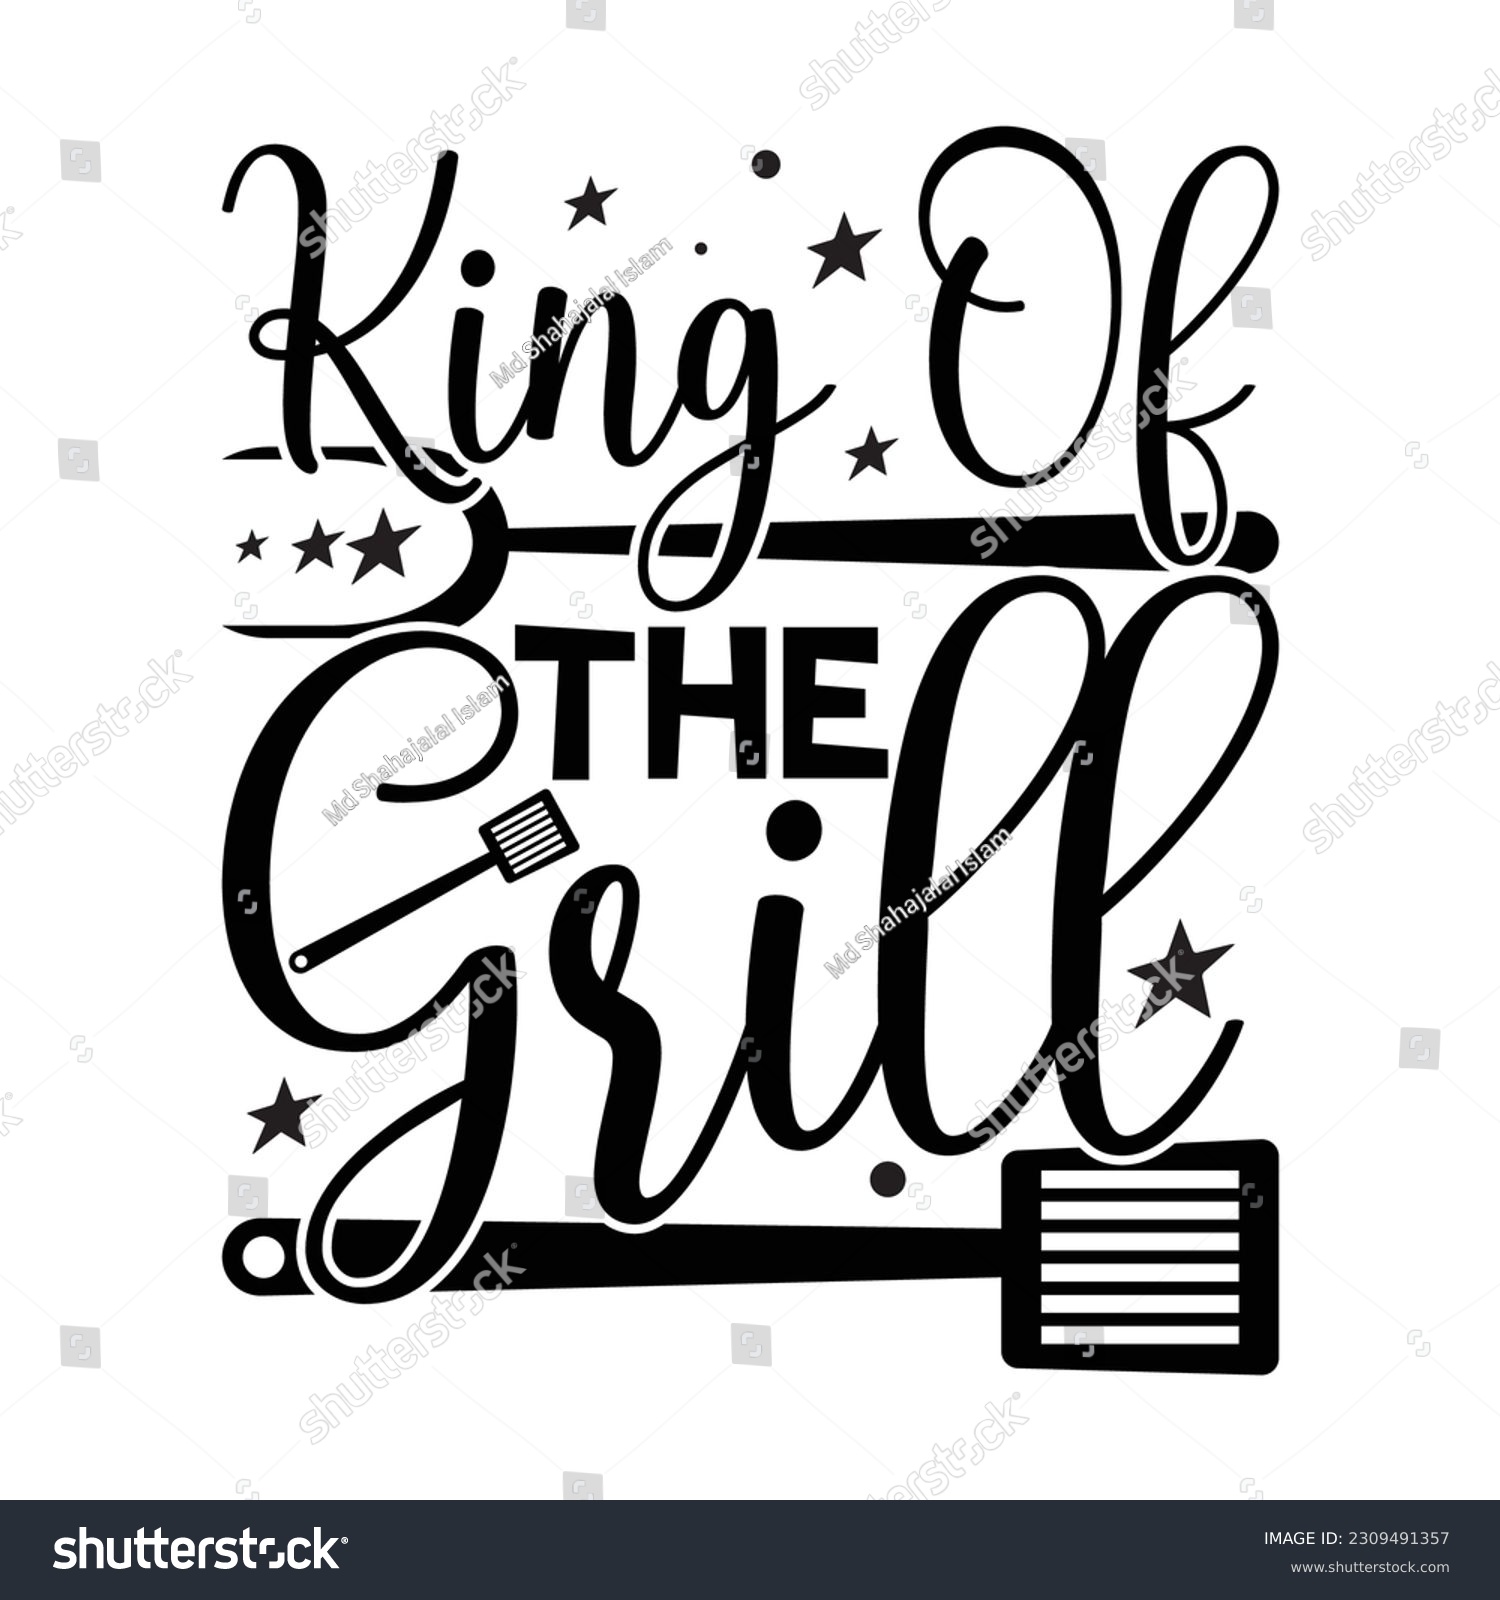 SVG of King of the grill, Father's day shirt SVG print template, Typography design, web template, t shirt design, print, papa, daddy, uncle, Retro vintage style t shirt svg